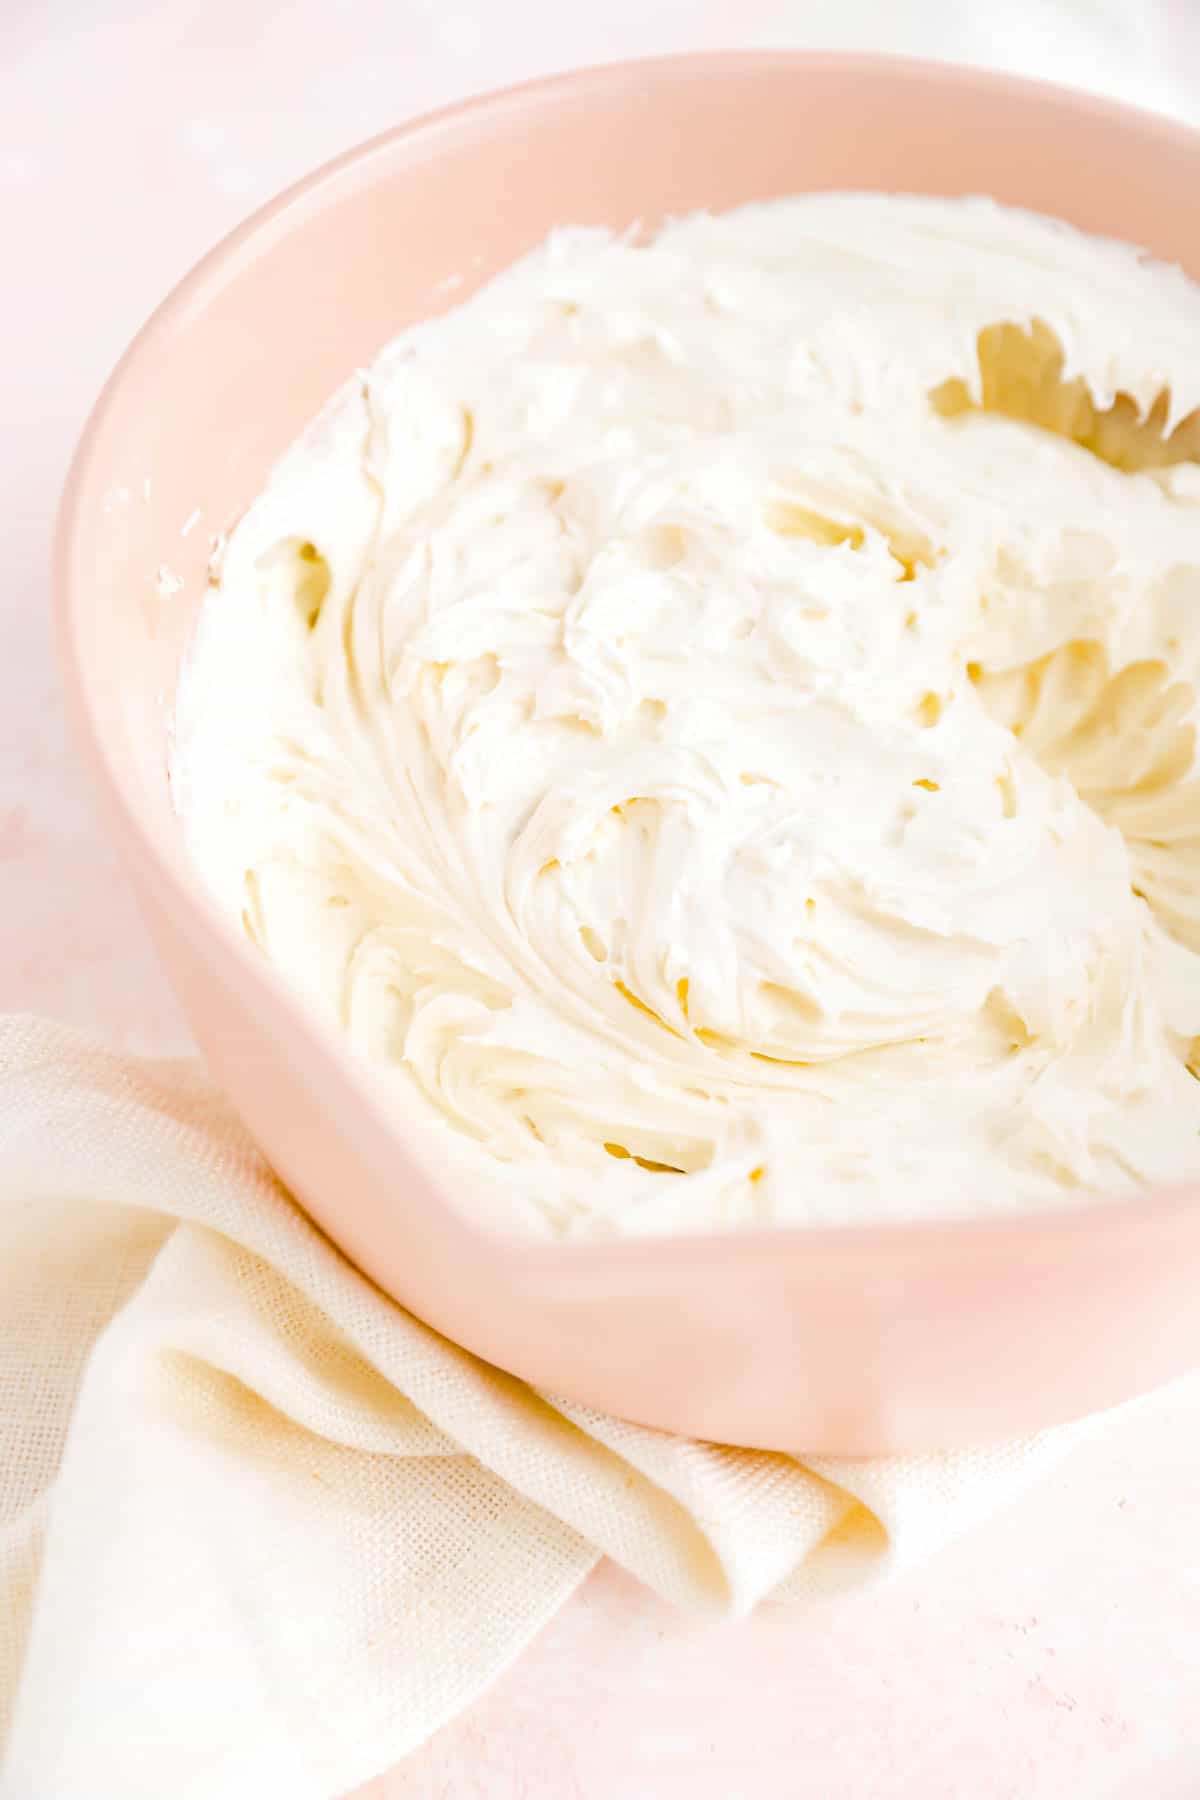 a bowl filled with freshly whipped cream cheese frosting.